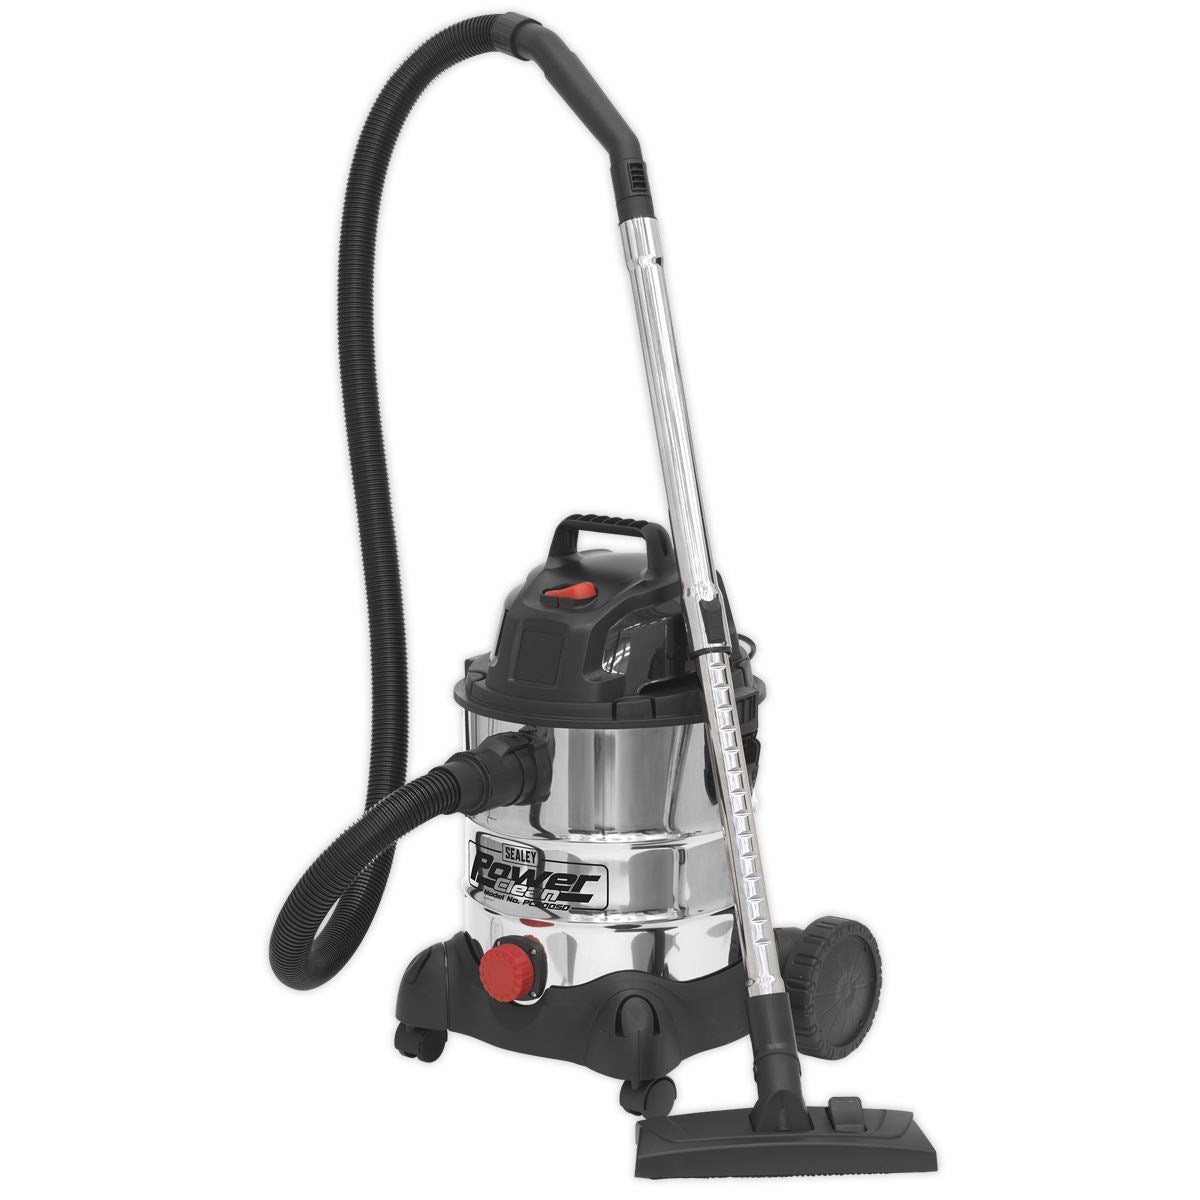 Sealey Vacuum Cleaner Industrial Wet & Dry 20L 1250W/230V Stainless Drum